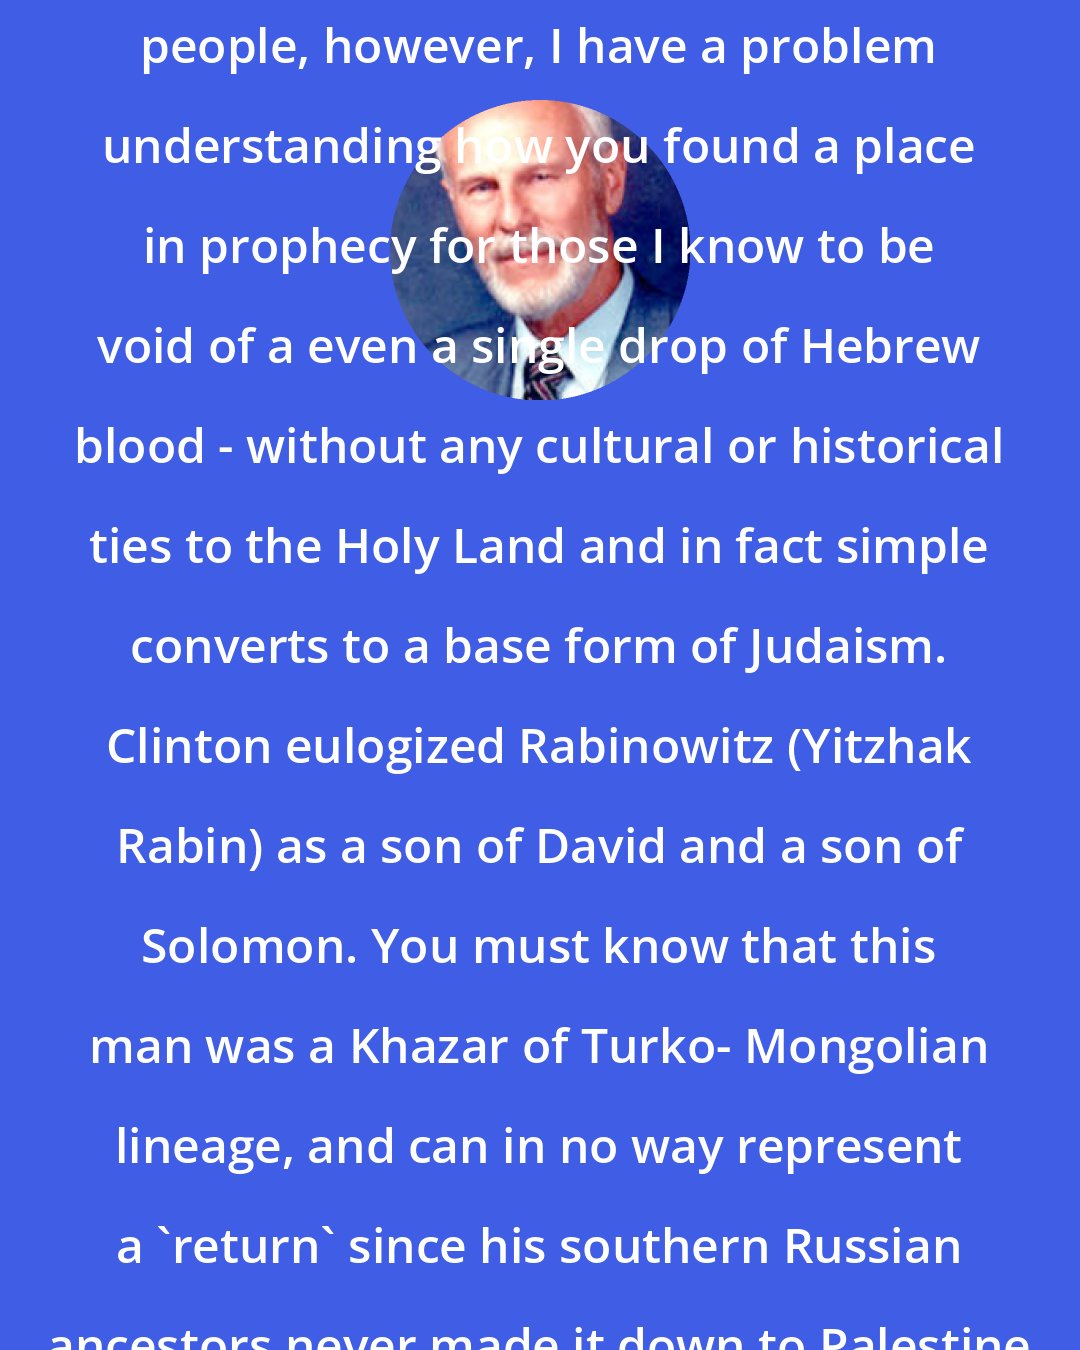 Dave Hunt: Sirs, you are doubtlessly intelligent people, however, I have a problem understanding how you found a place in prophecy for those I know to be void of a even a single drop of Hebrew blood - without any cultural or historical ties to the Holy Land and in fact simple converts to a base form of Judaism. Clinton eulogized Rabinowitz (Yitzhak Rabin) as a son of David and a son of Solomon. You must know that this man was a Khazar of Turko- Mongolian lineage, and can in no way represent a 'return' since his southern Russian ancestors never made it down to Palestine until 1948.